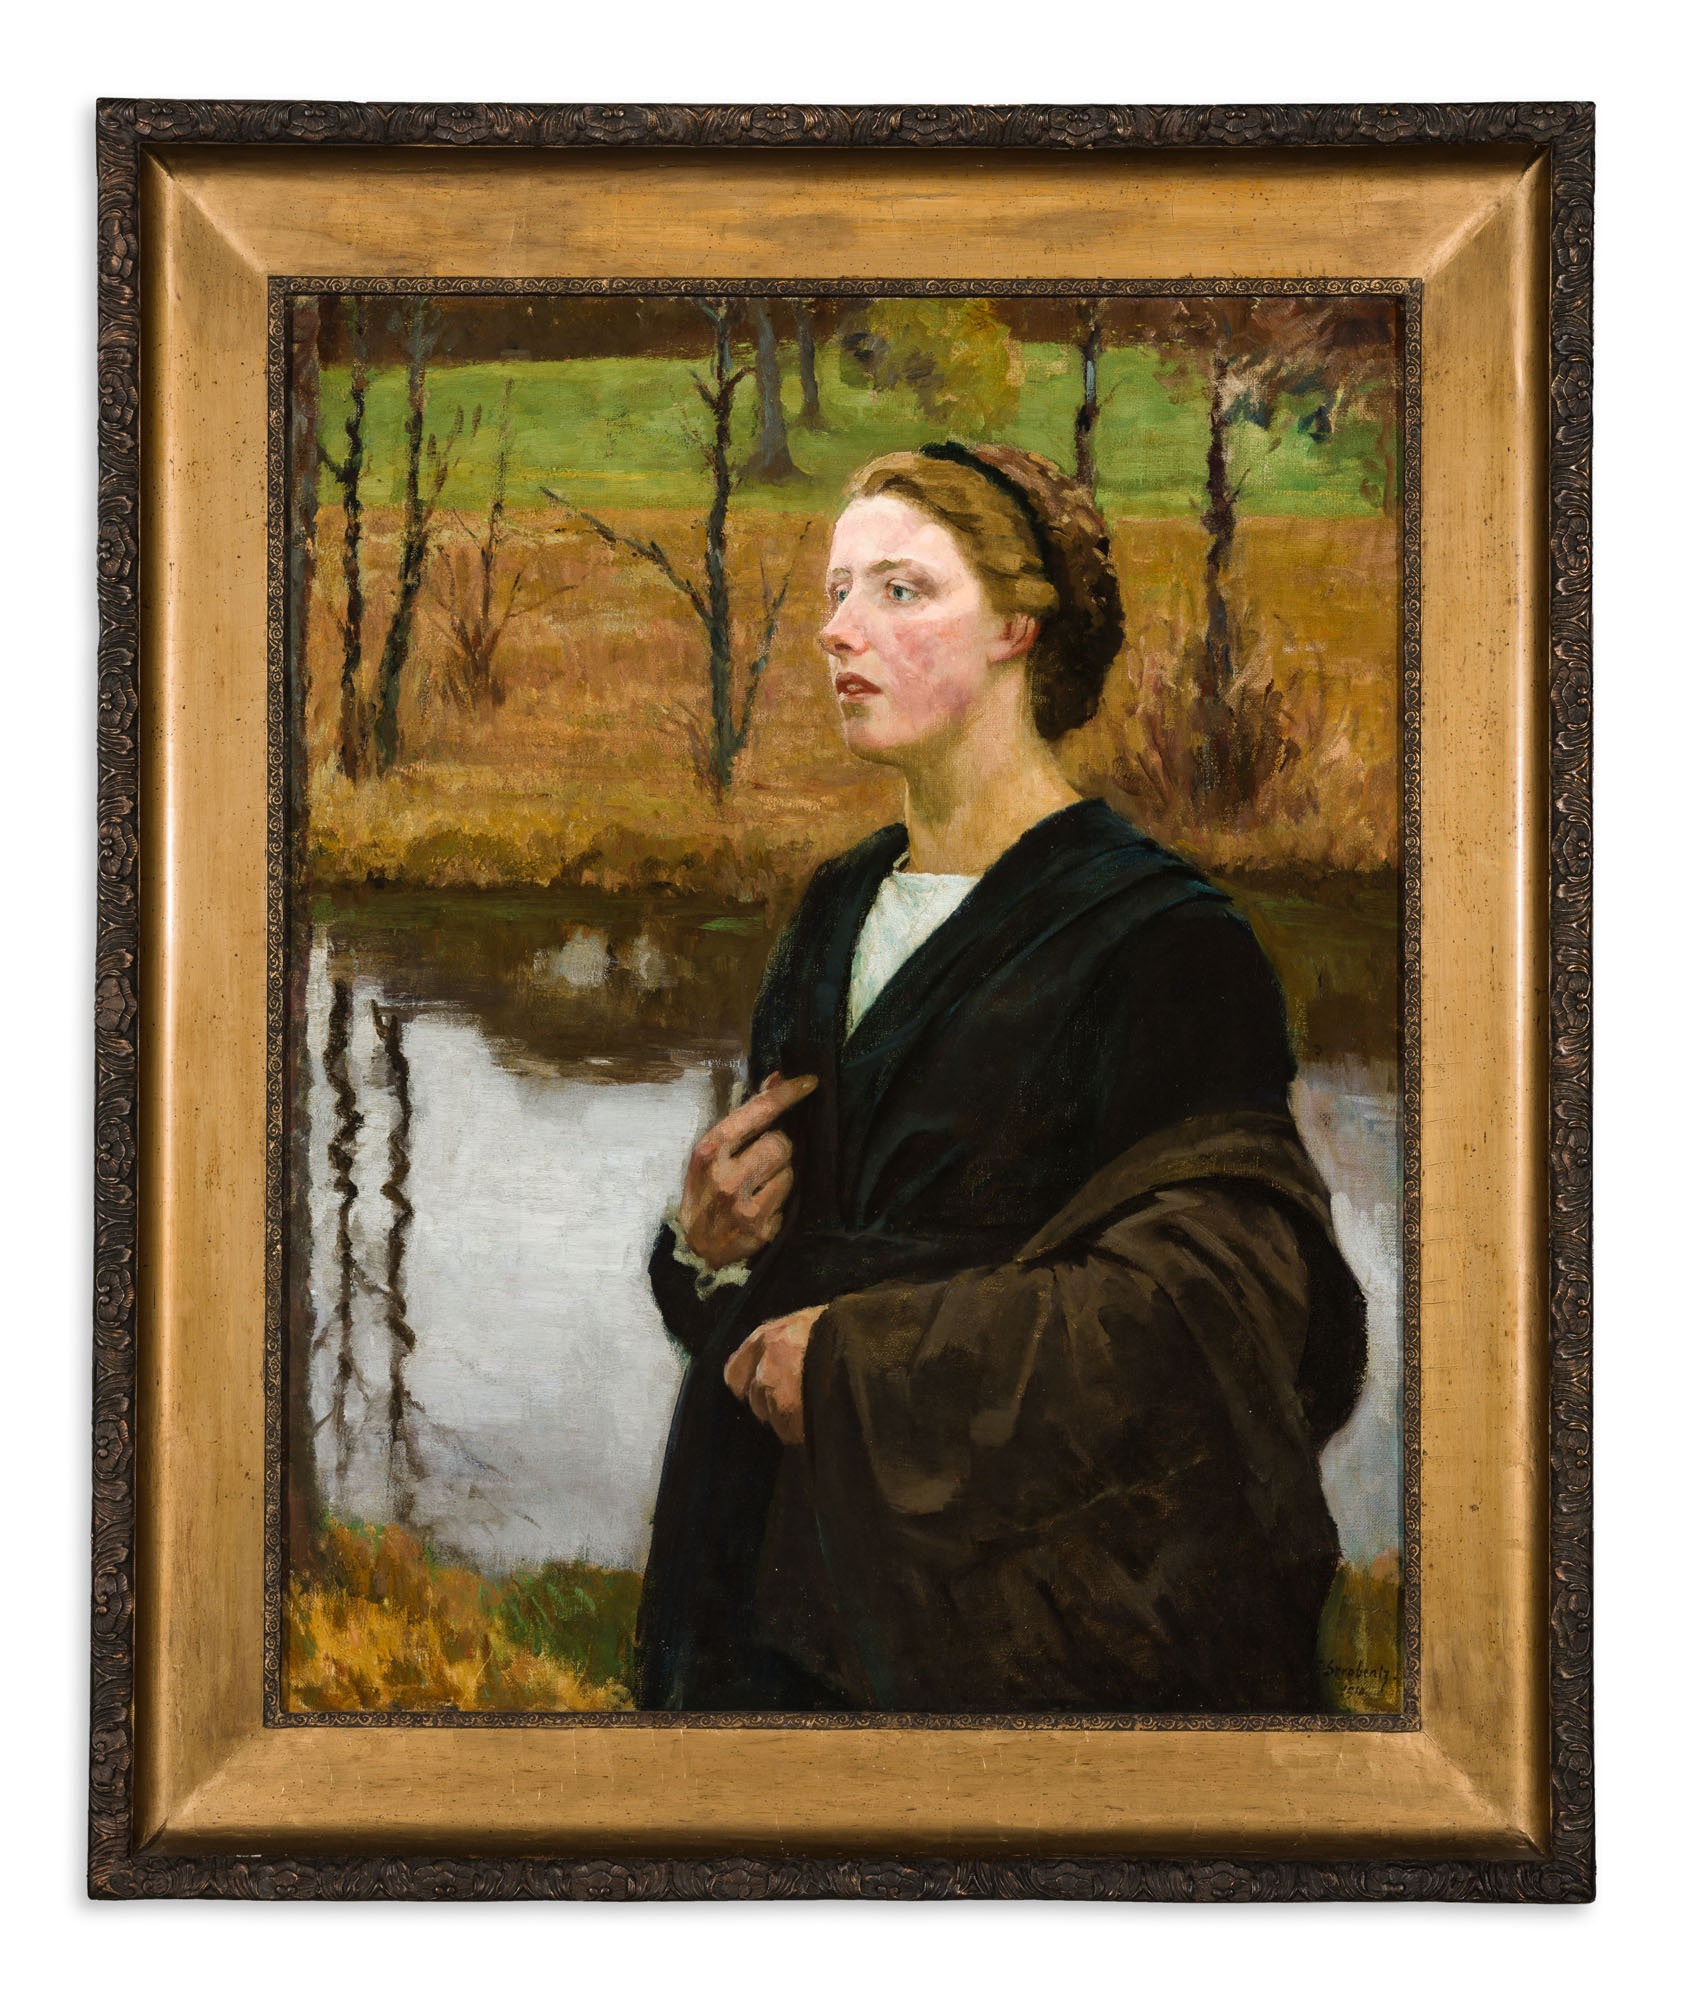 Frigyes Strobentz: untitled (known as “Woman in Landscape”) (The Salgo Trust for Education CC BY-NC-SA)